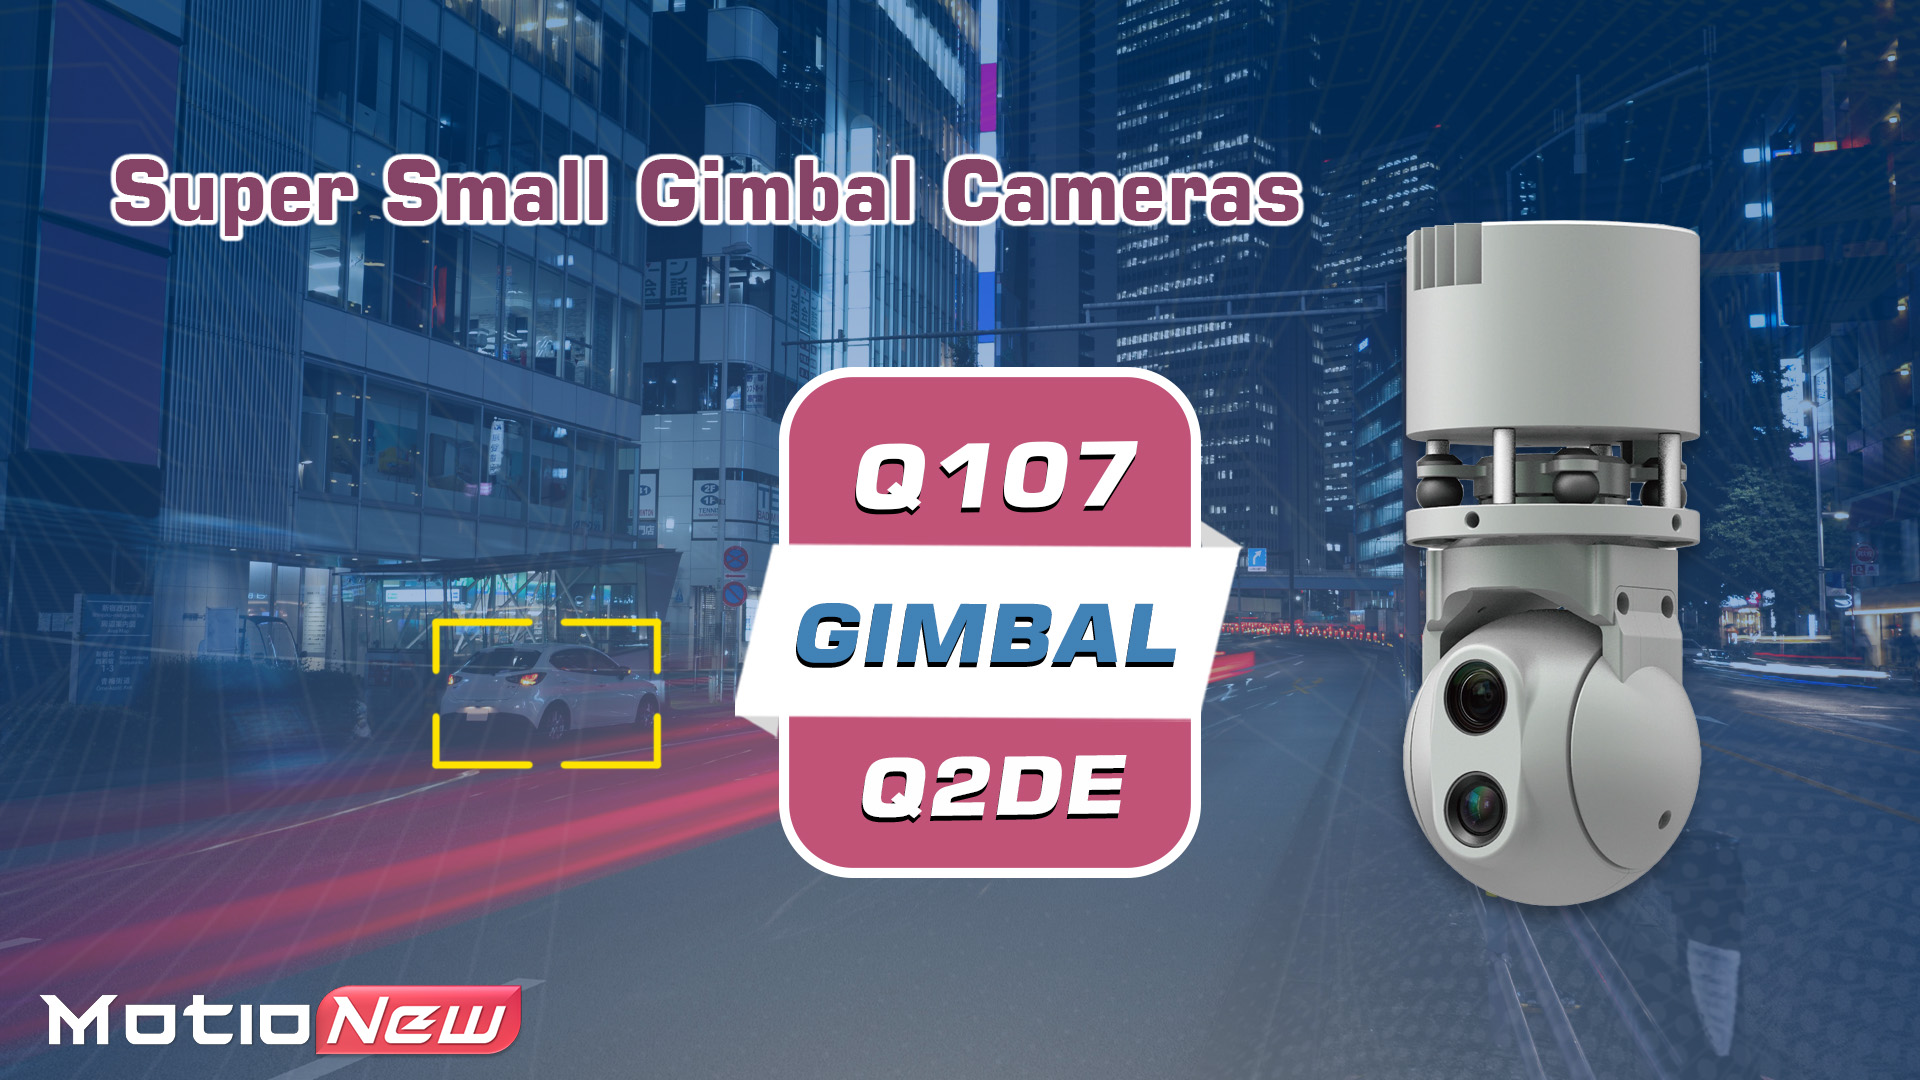 Read more about the article how the hawk eye mini gimbal cameras are revolutionizing drone photography and surveillance applications